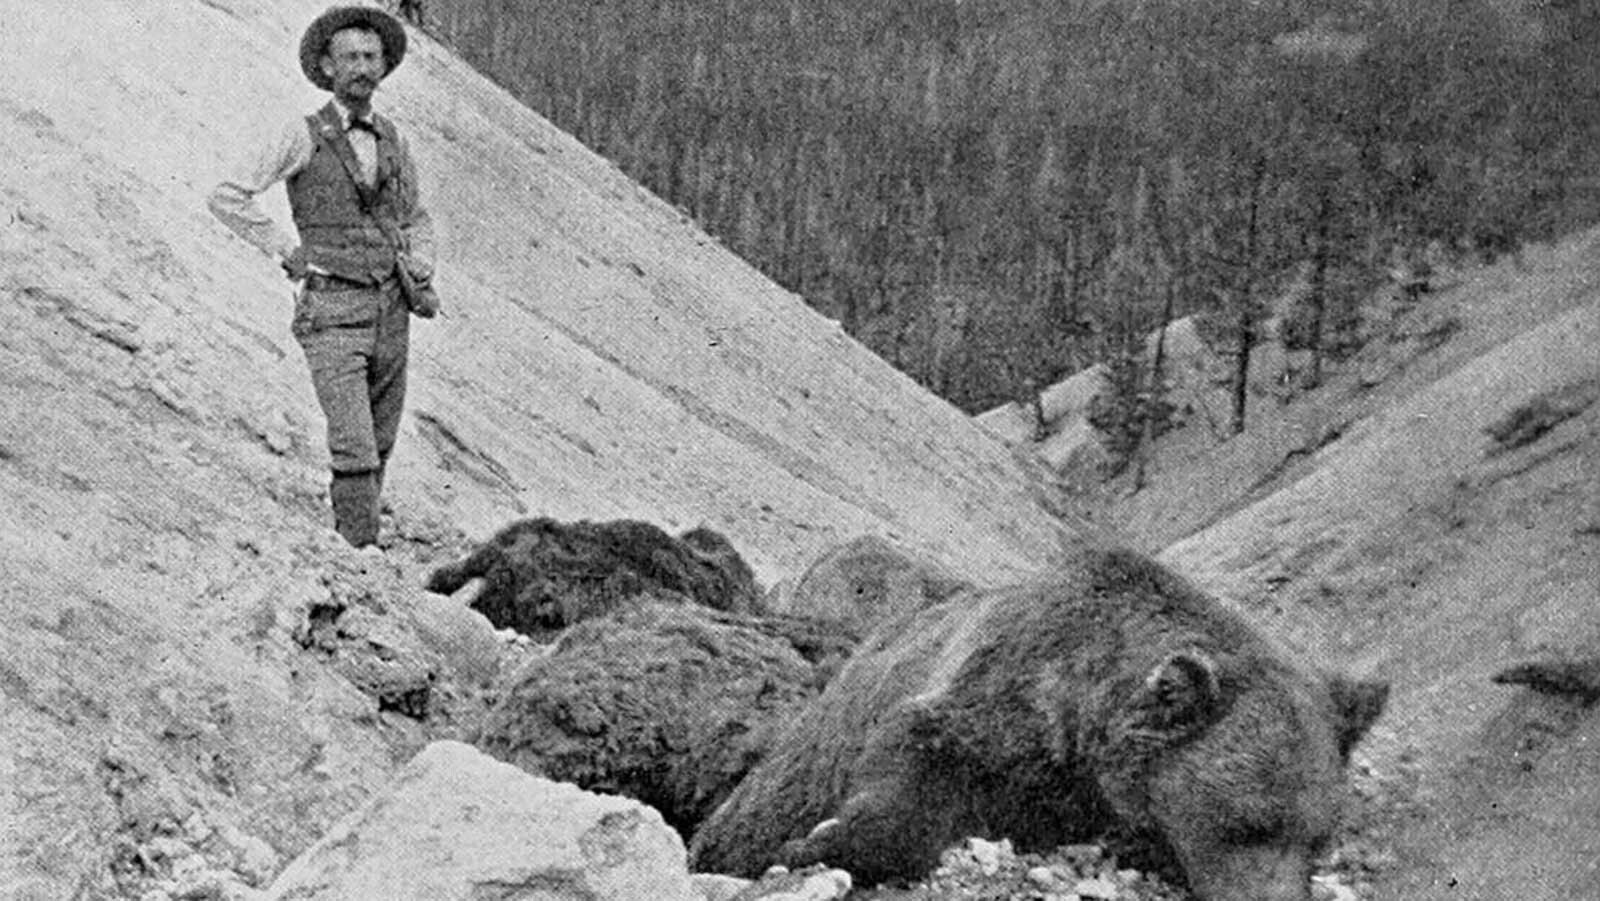 The carcass of a large silver-tipped grizzly bear, which succumbed to poisonous gases in the area known as Death Gulch in Yellowstone National Park in 1897.